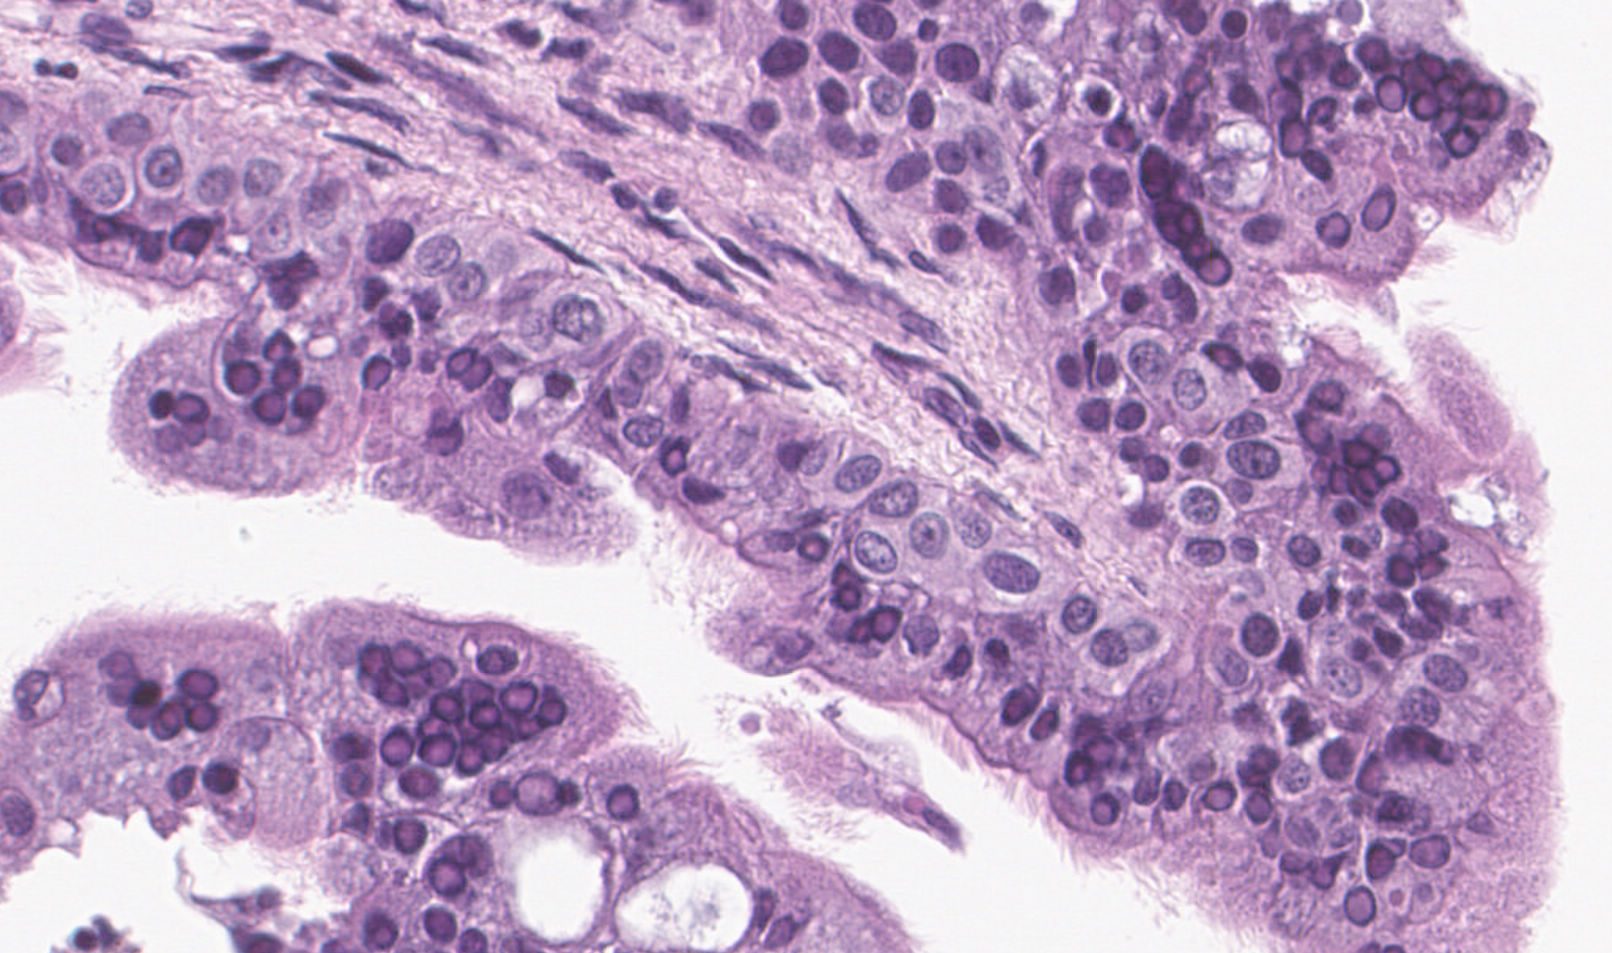 Lung samples showed syncytial giant cells and intranuclear inclusions, both signs of measles infection.